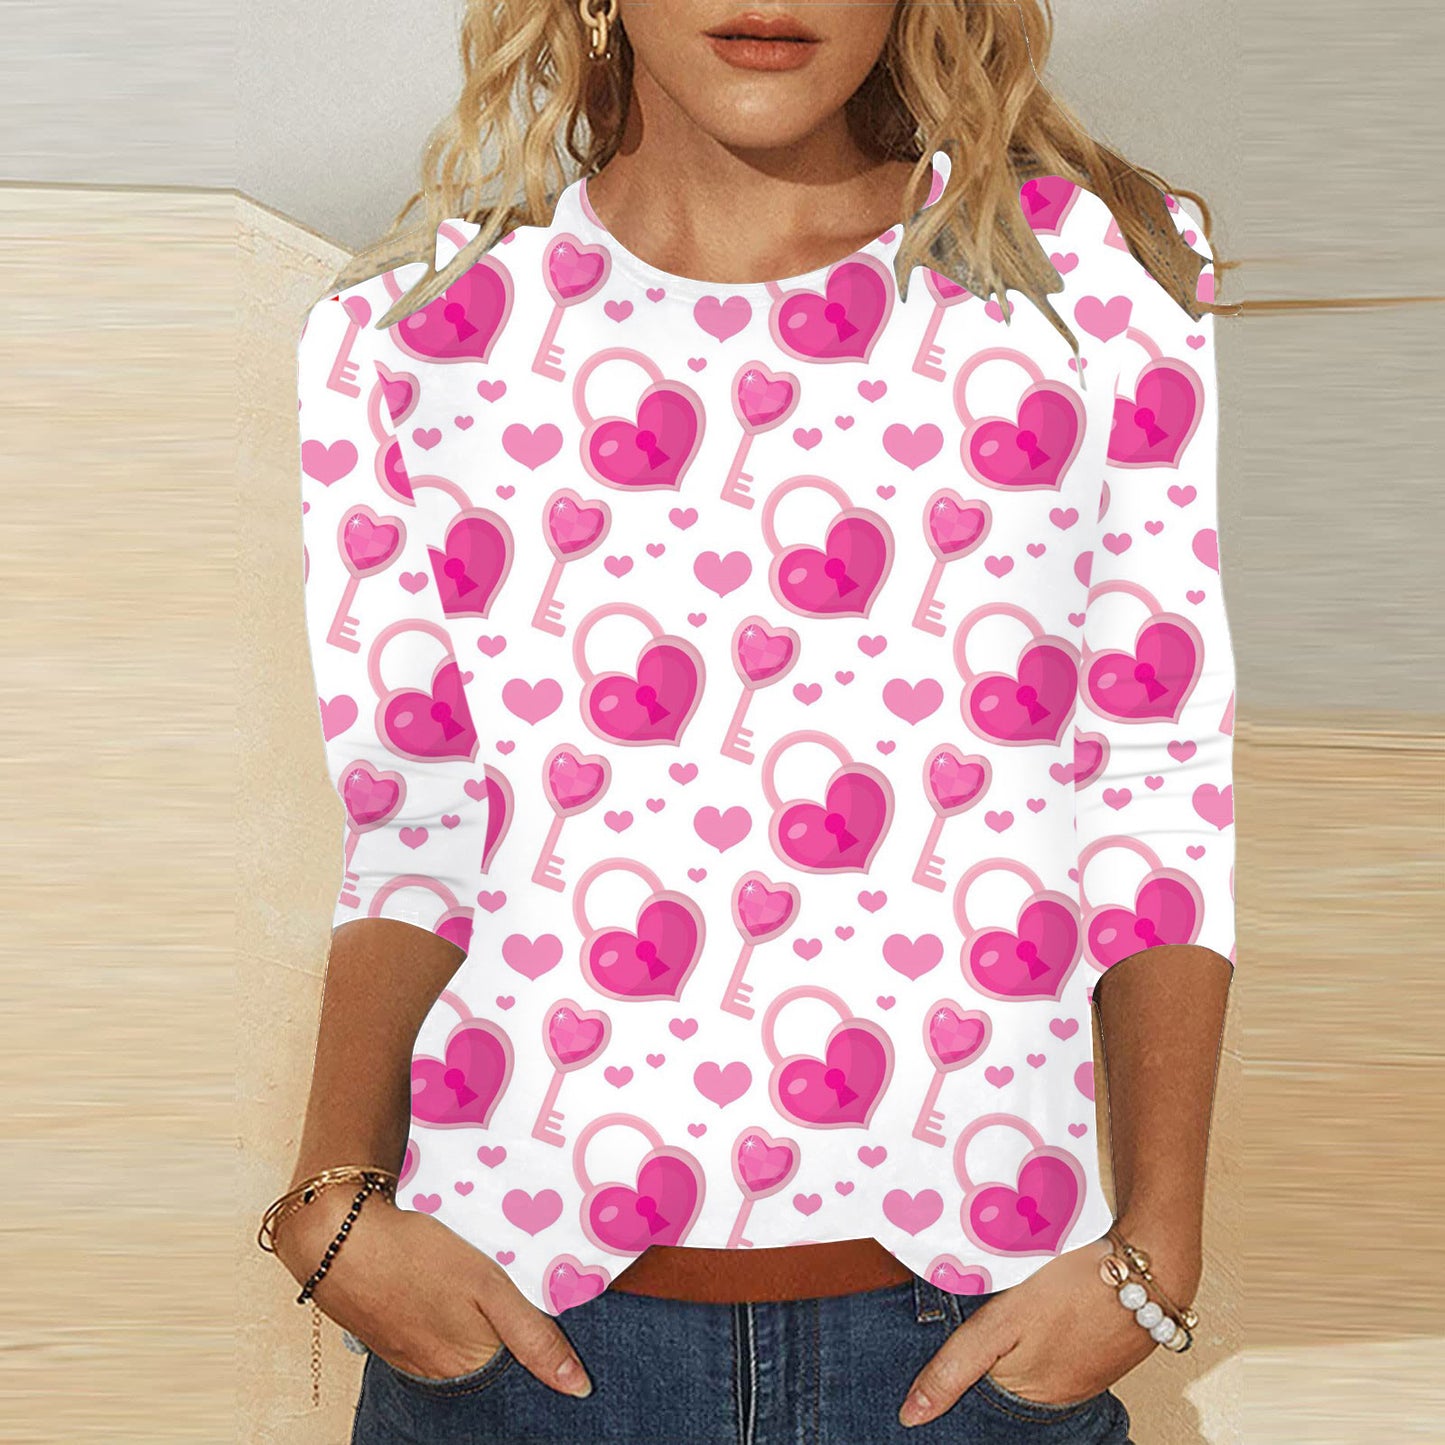 Valentine's Day Female With Hearts Printing Crew Neck T-shirt Top